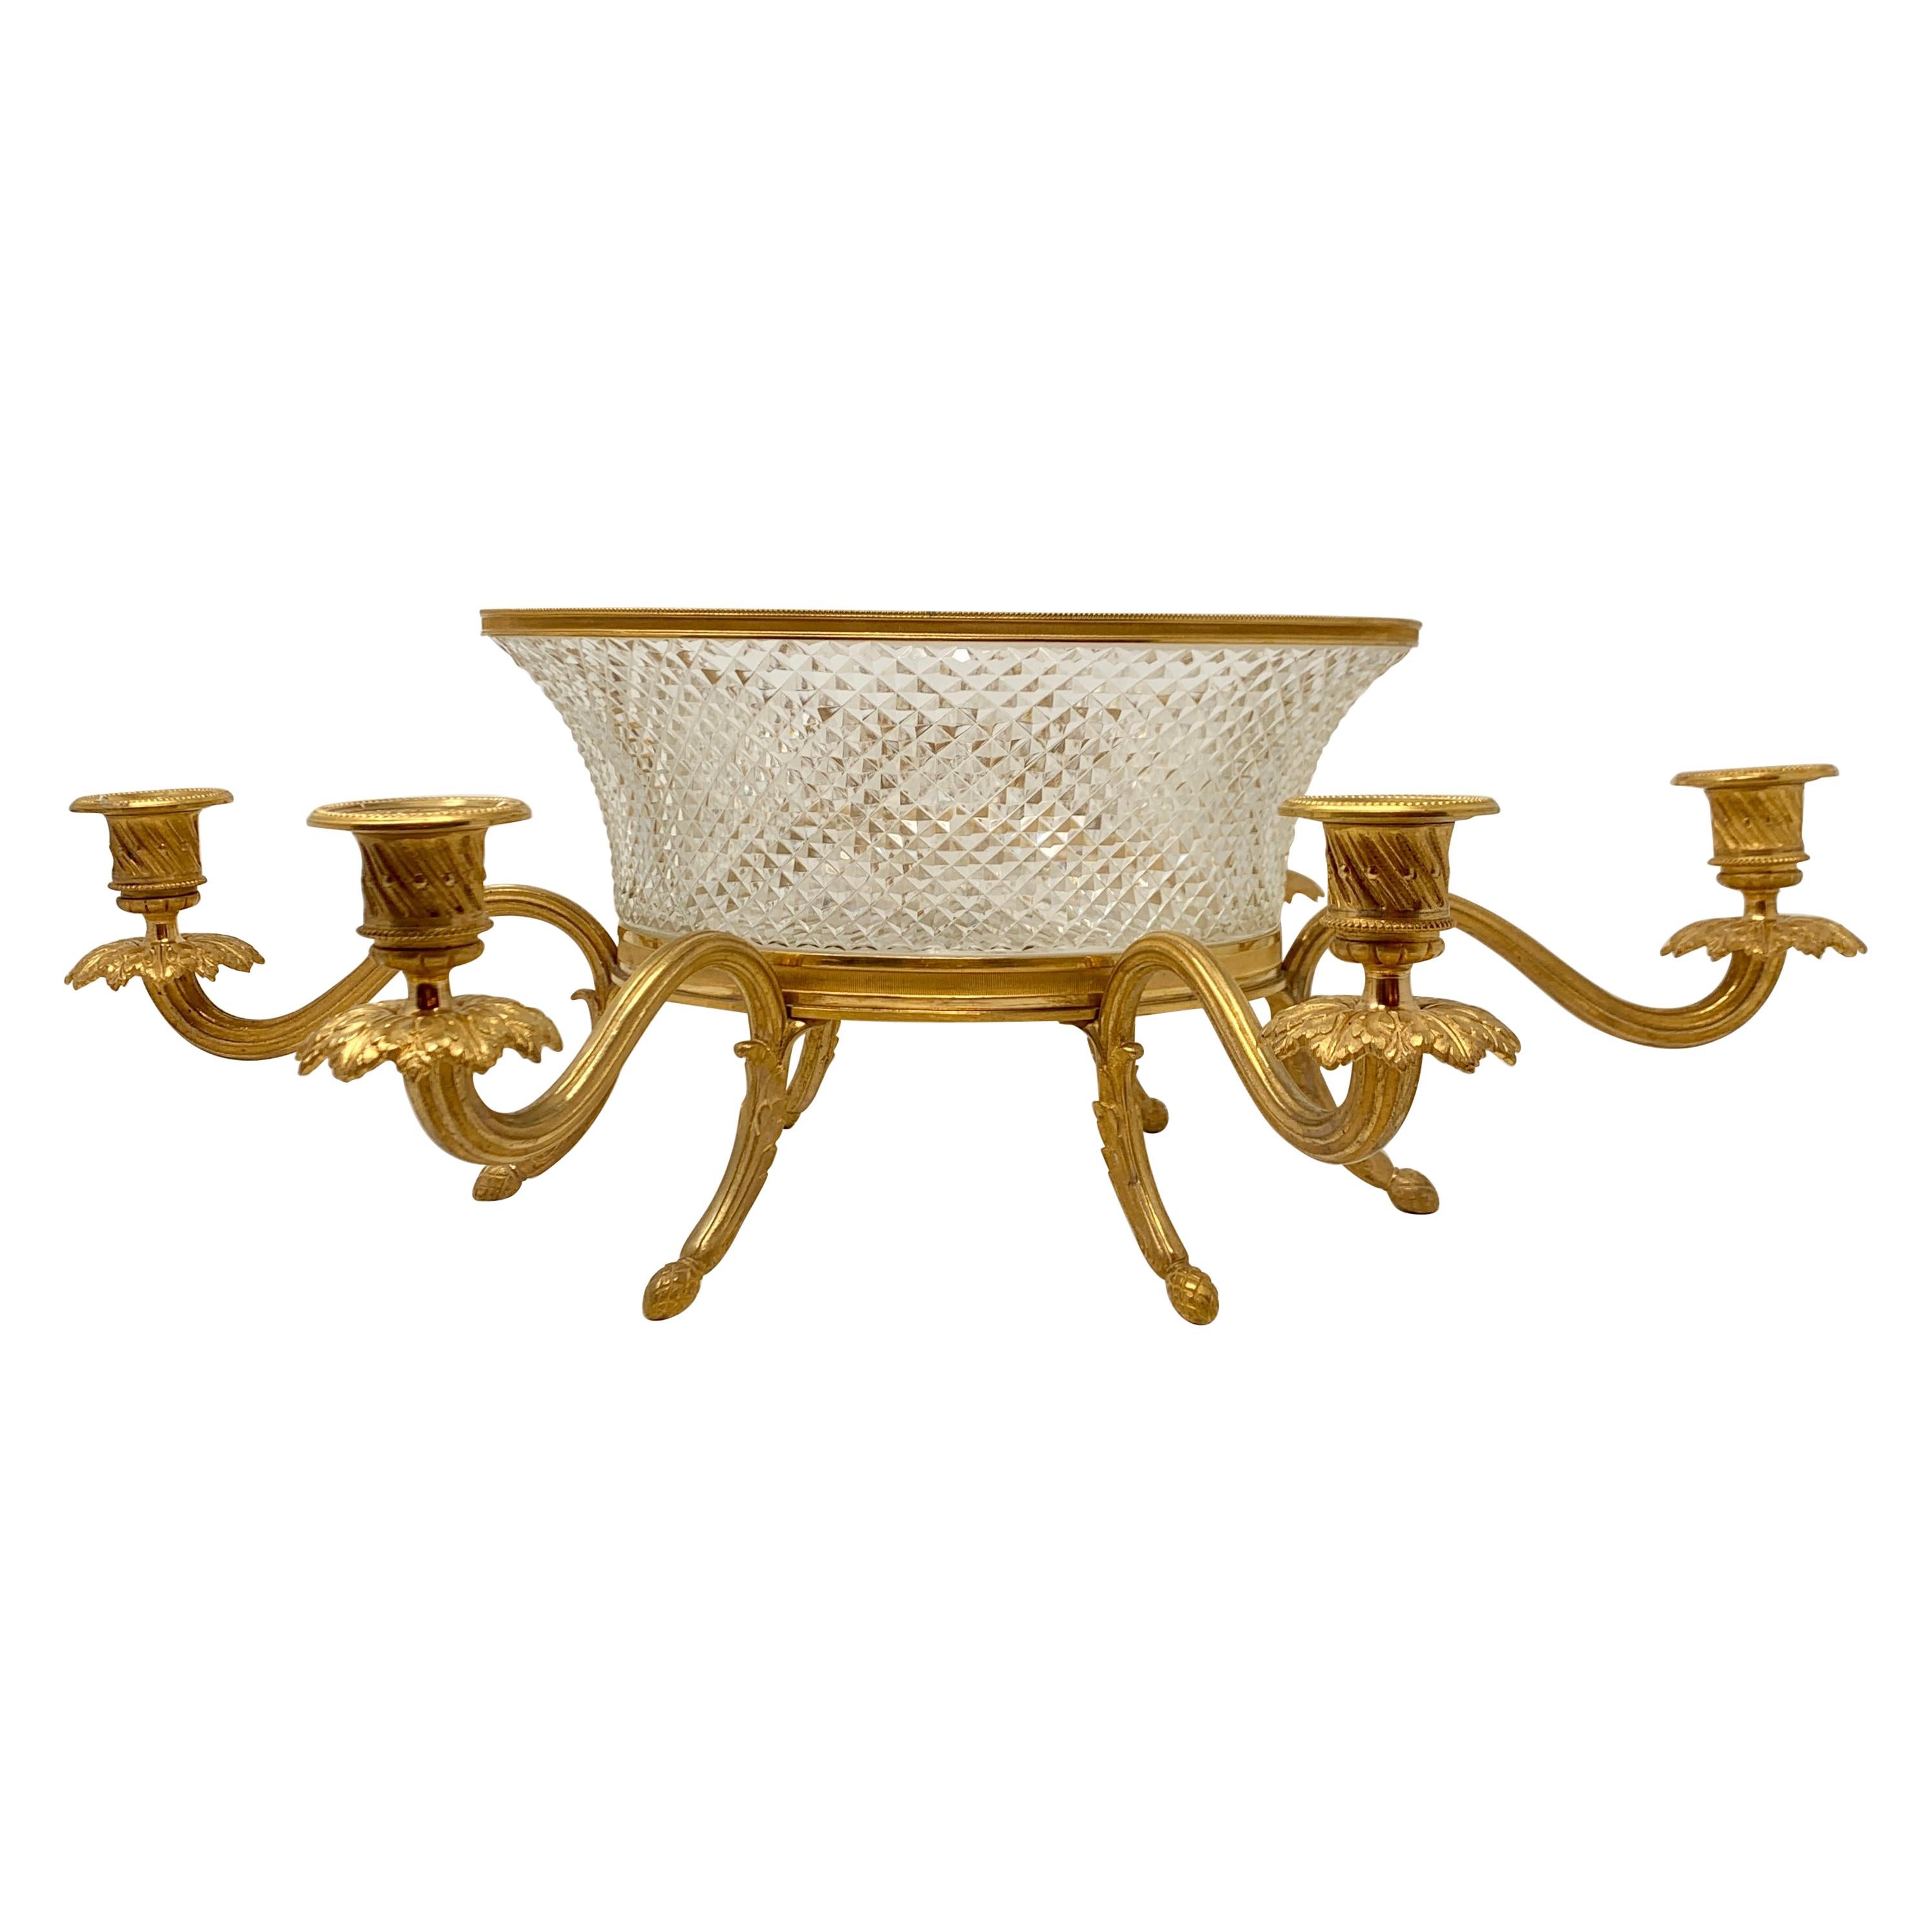 Antique French Ormolu and Cut Crystal Centerpiece with 6 Candelabra, Circa 1900